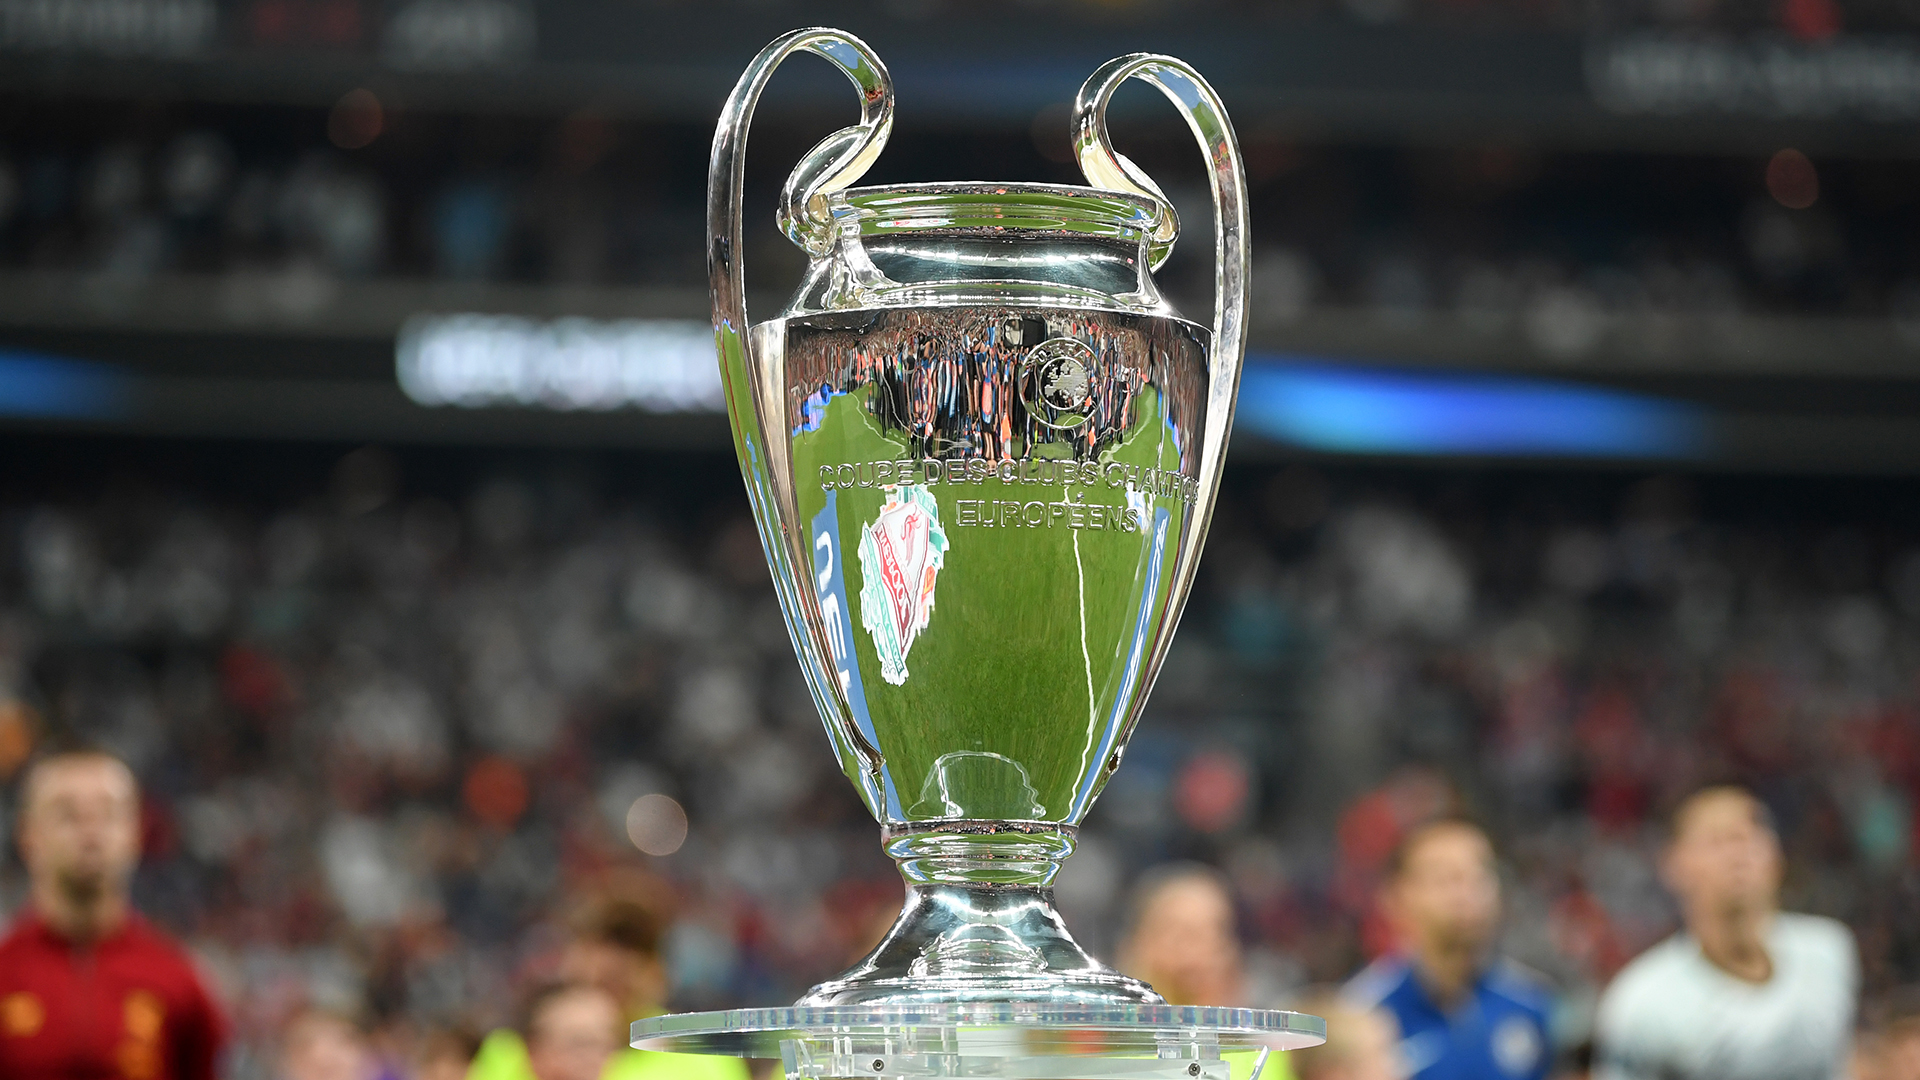 Champions League draw: All you need to know about the next round, Football, Sport